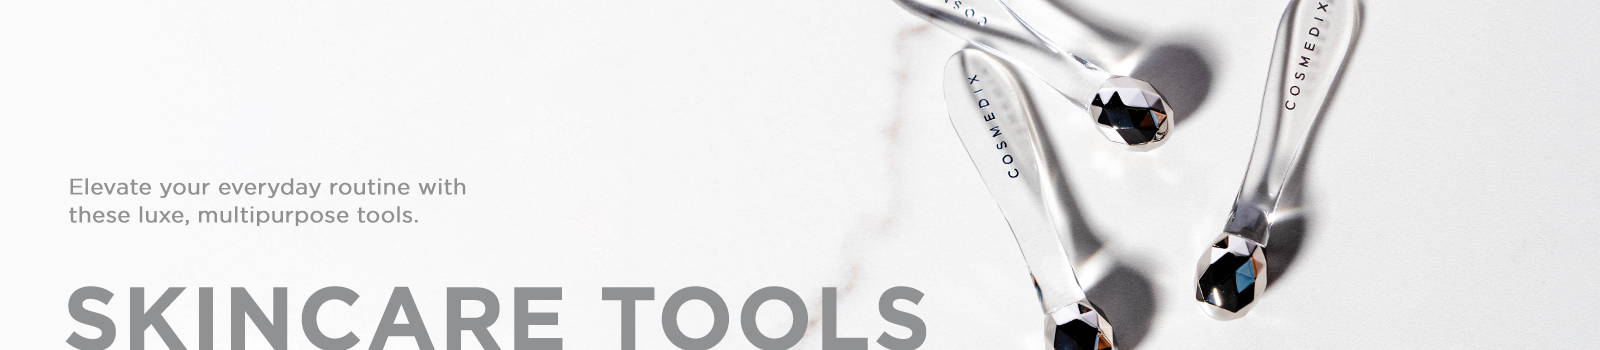 Category Banner - Skincare Tools